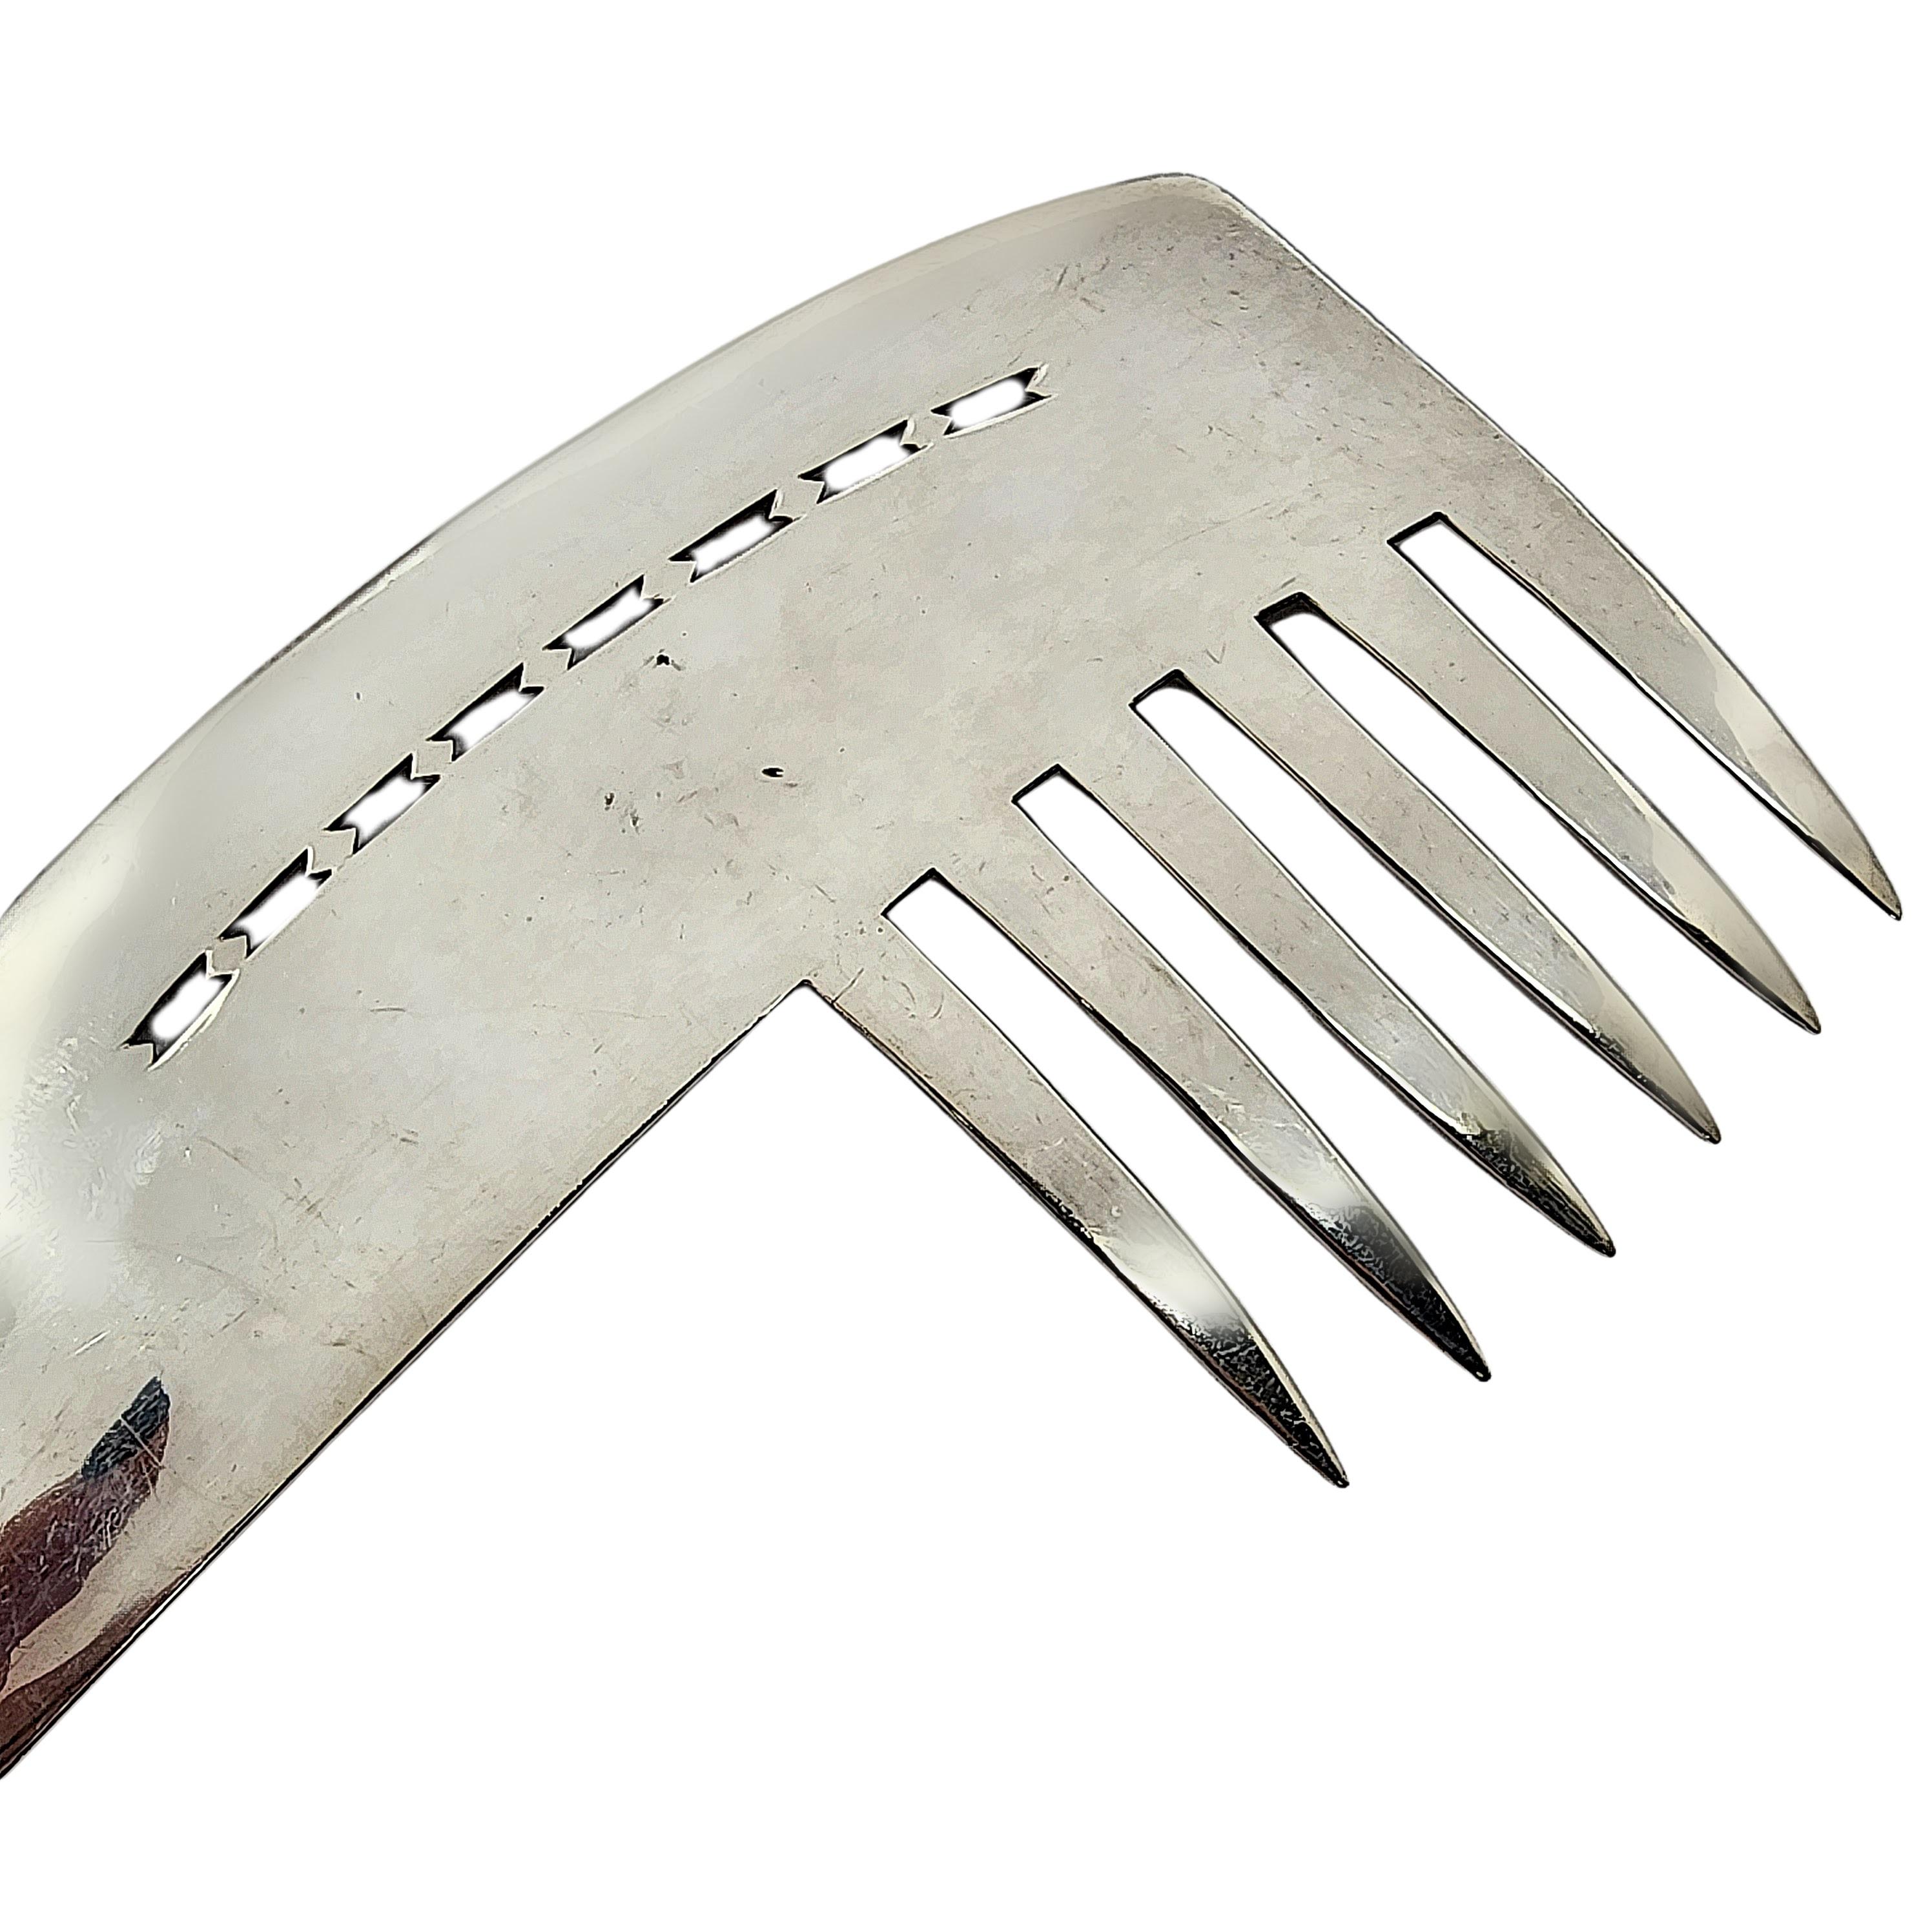 Antique sterling silver fish slice skinner by John Shekleton of London, England, circa 1800.

No monogram

This large fish slice features six skinning teeth, a small cut-out pierced pattern on the blade and a rounded handle.

Measures approx 11 1/2